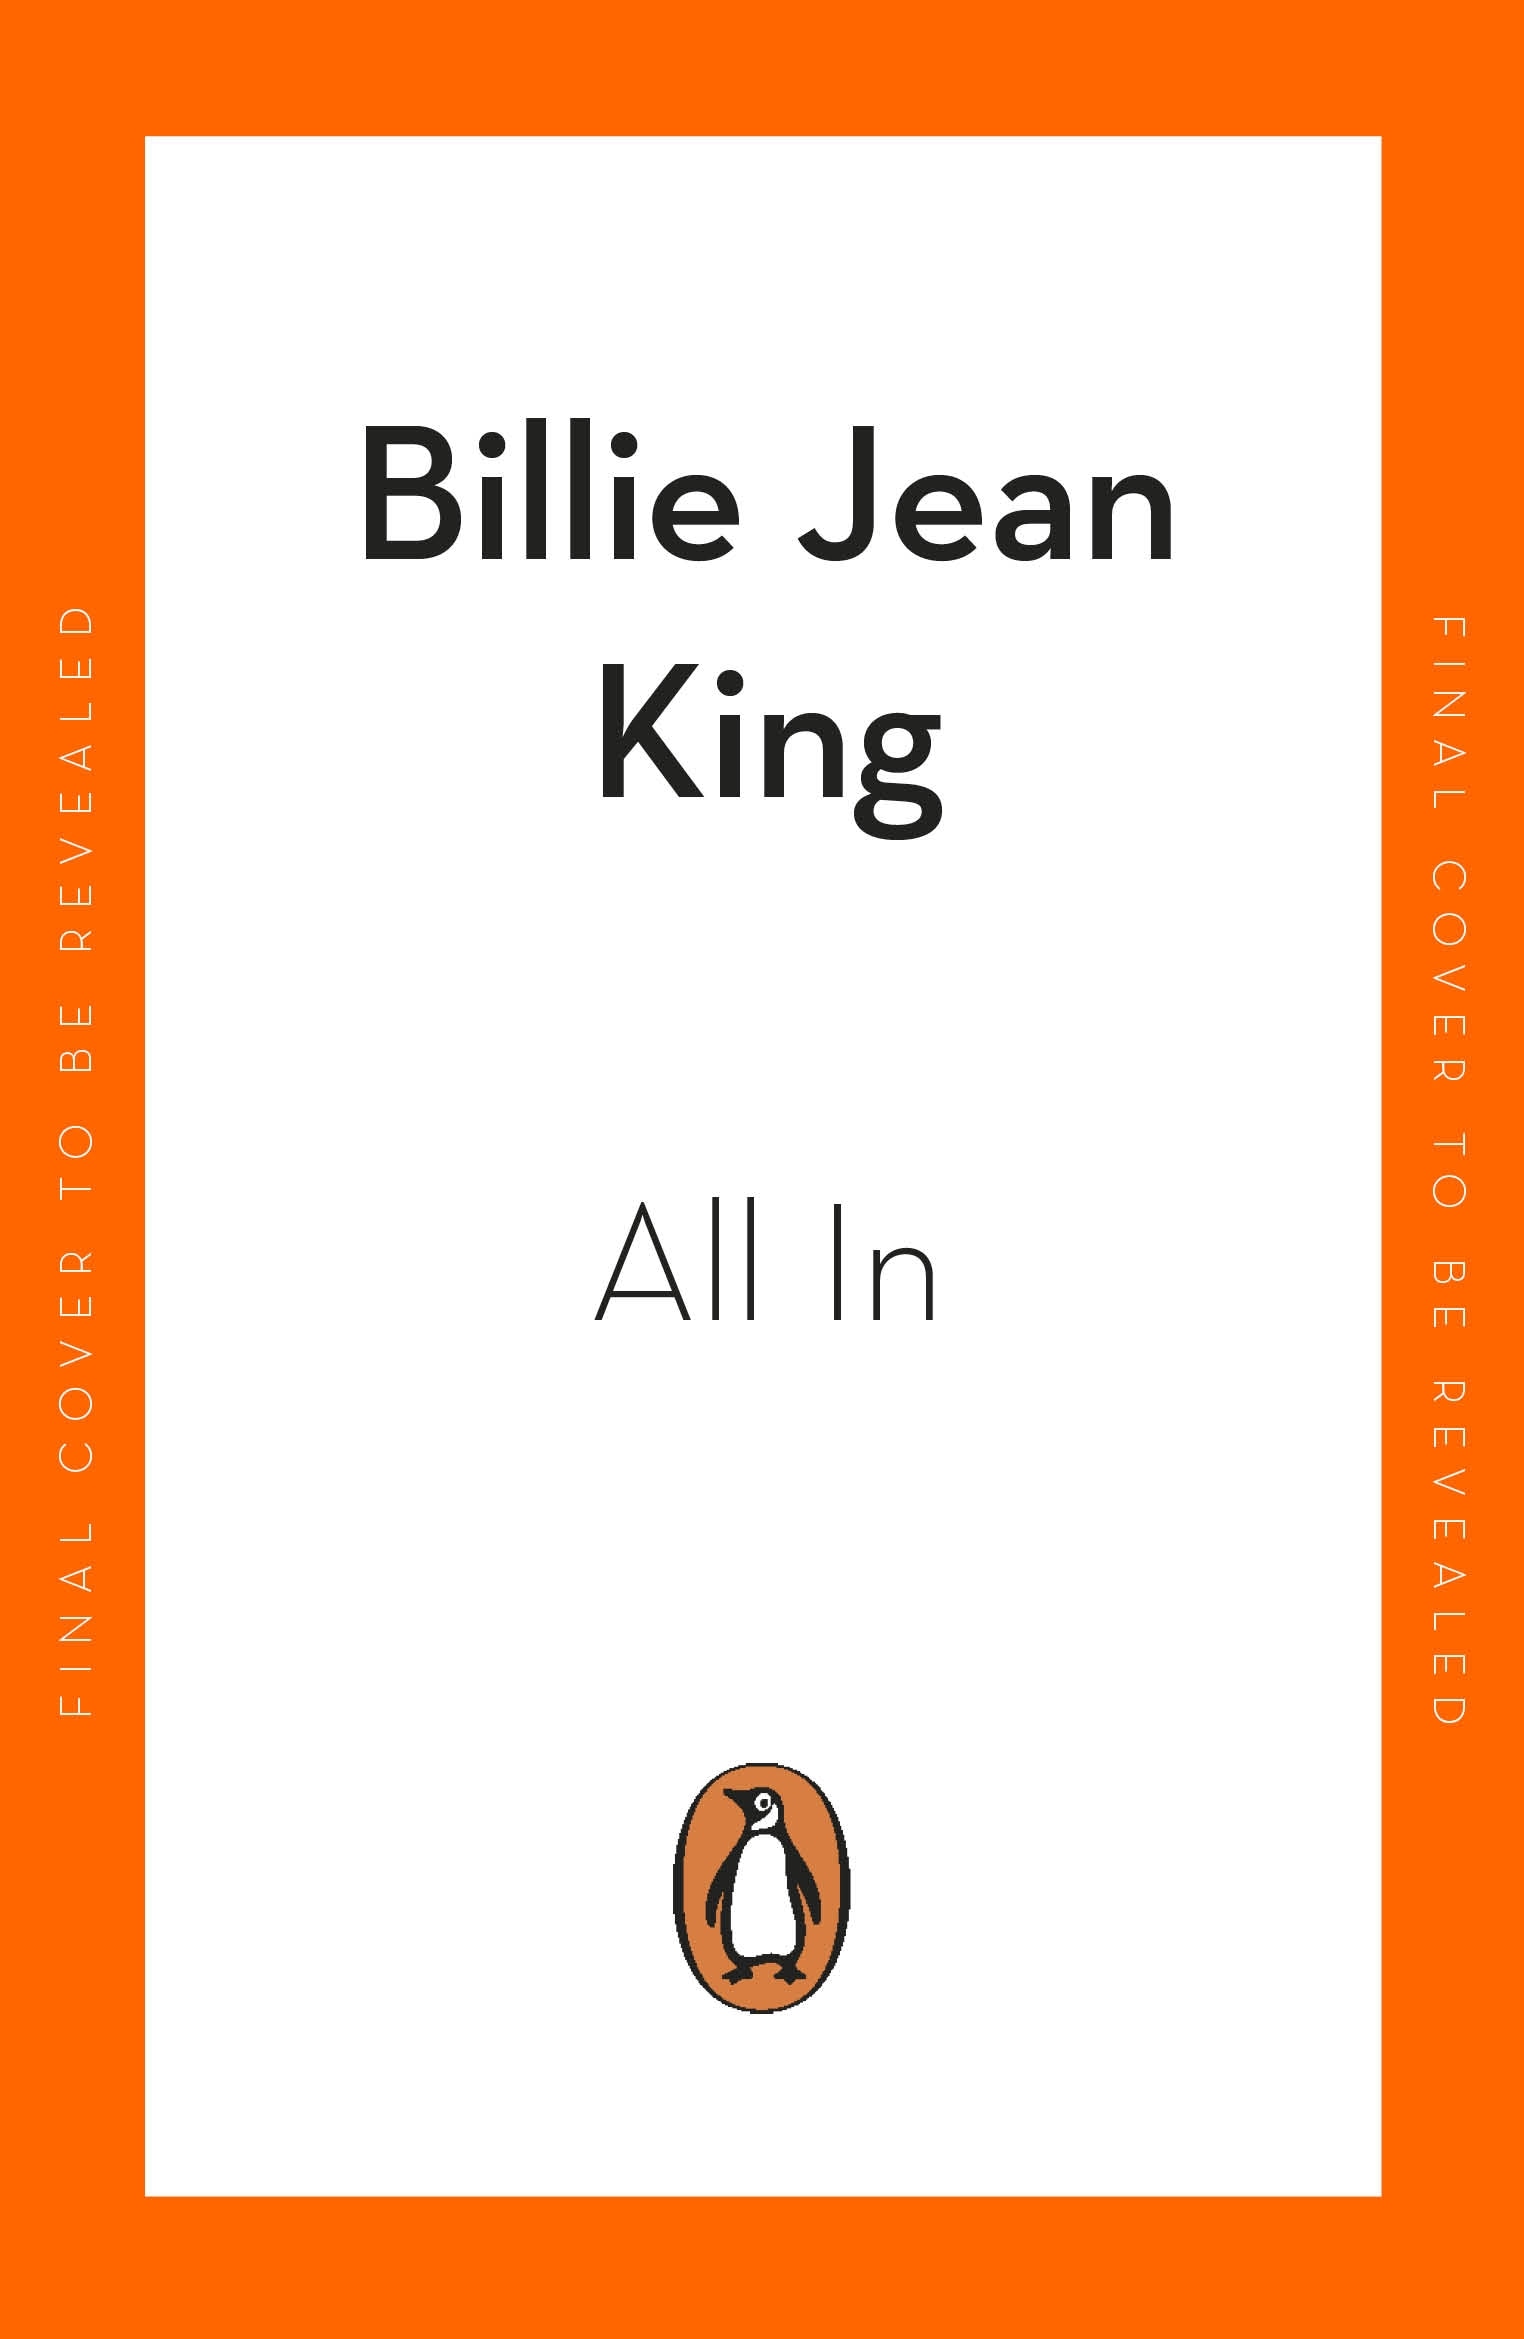 Book “All In” by Billie Jean King — June 16, 2022